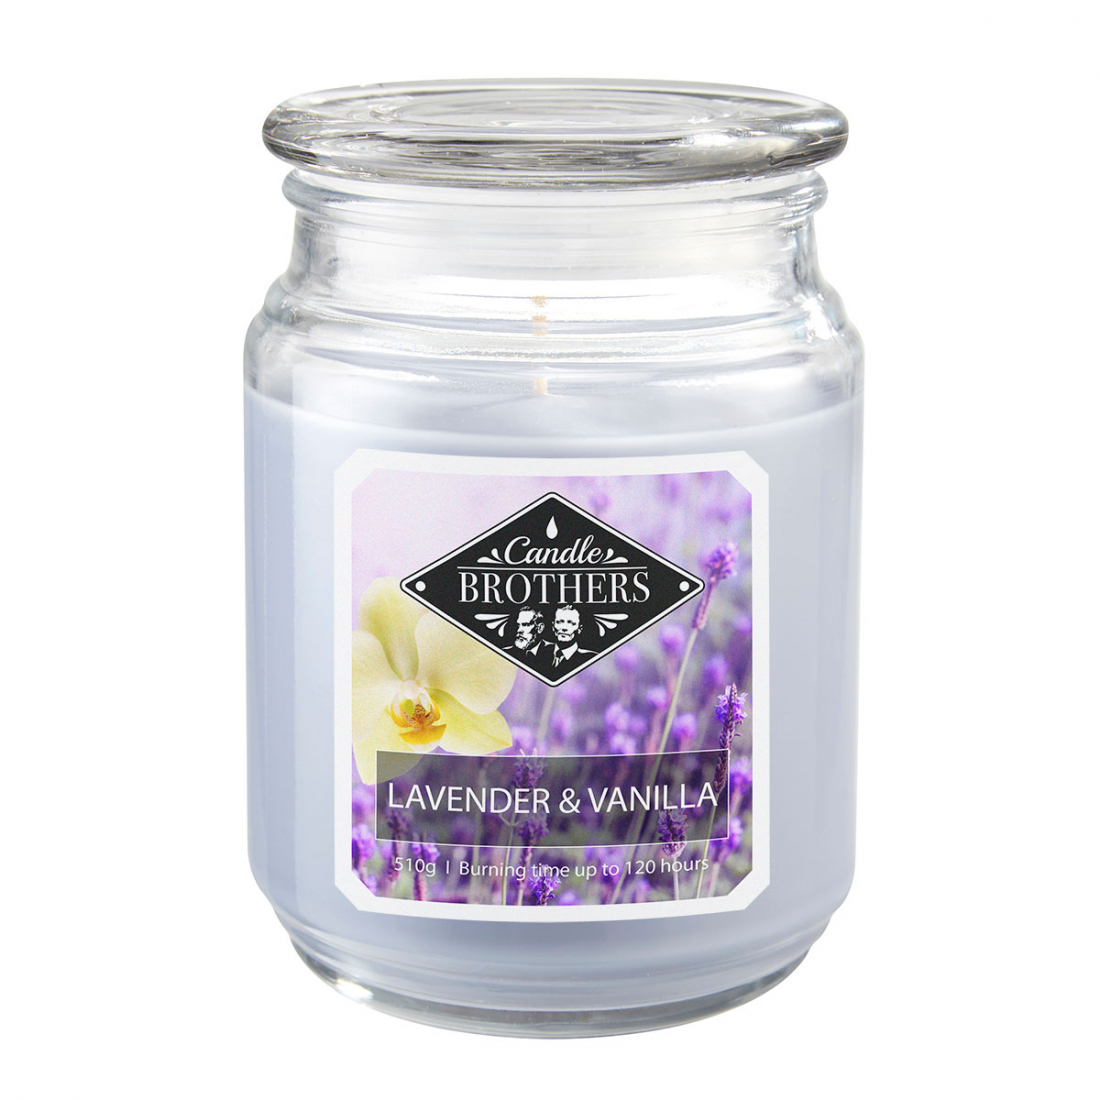 'Lavender & Vanilla' Scented Candle - 510 g